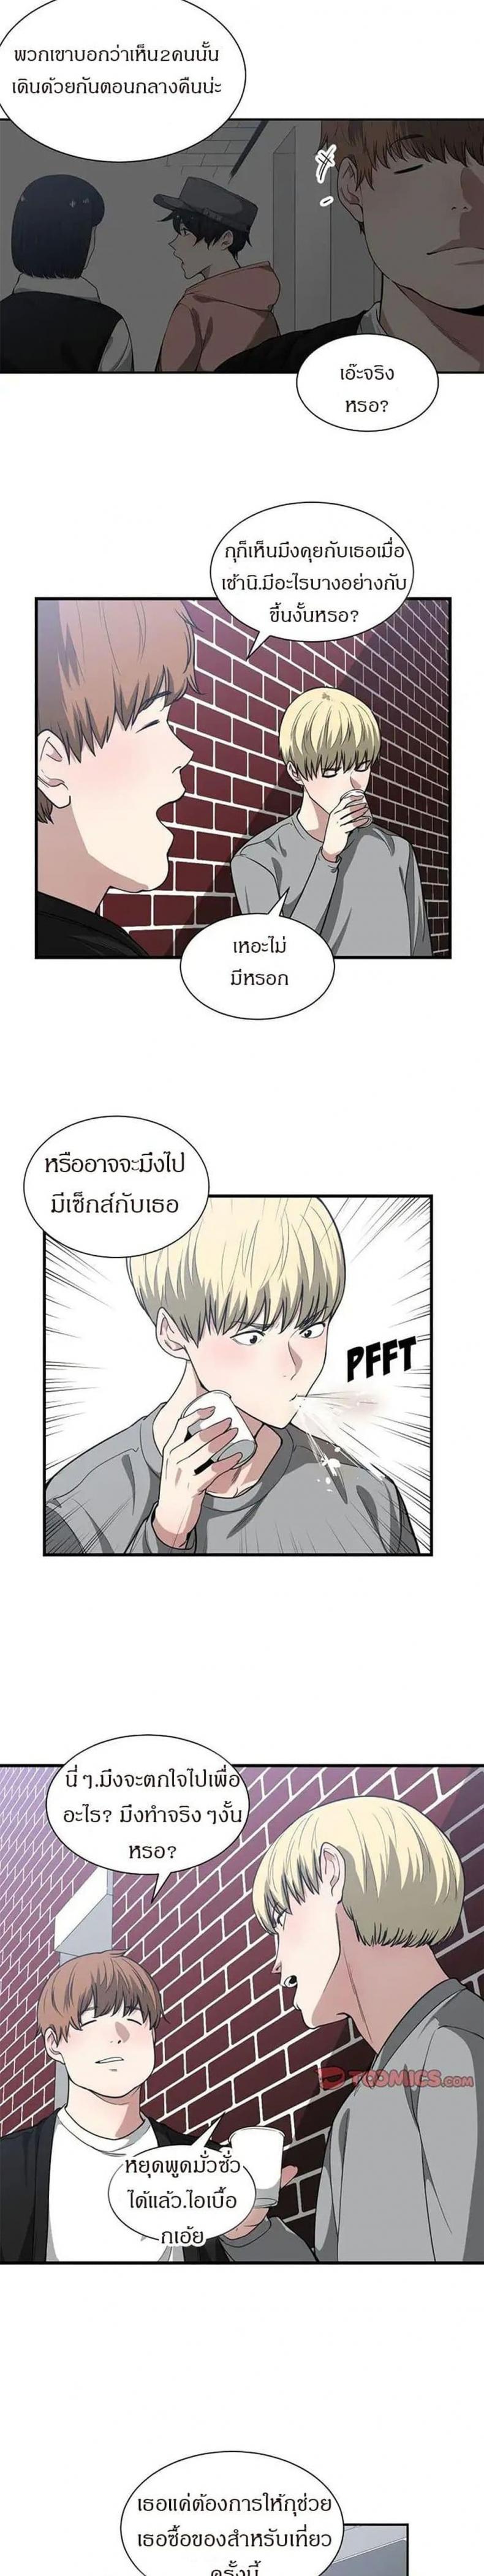 You’re Not That Special! 16 ภาพที่ 8